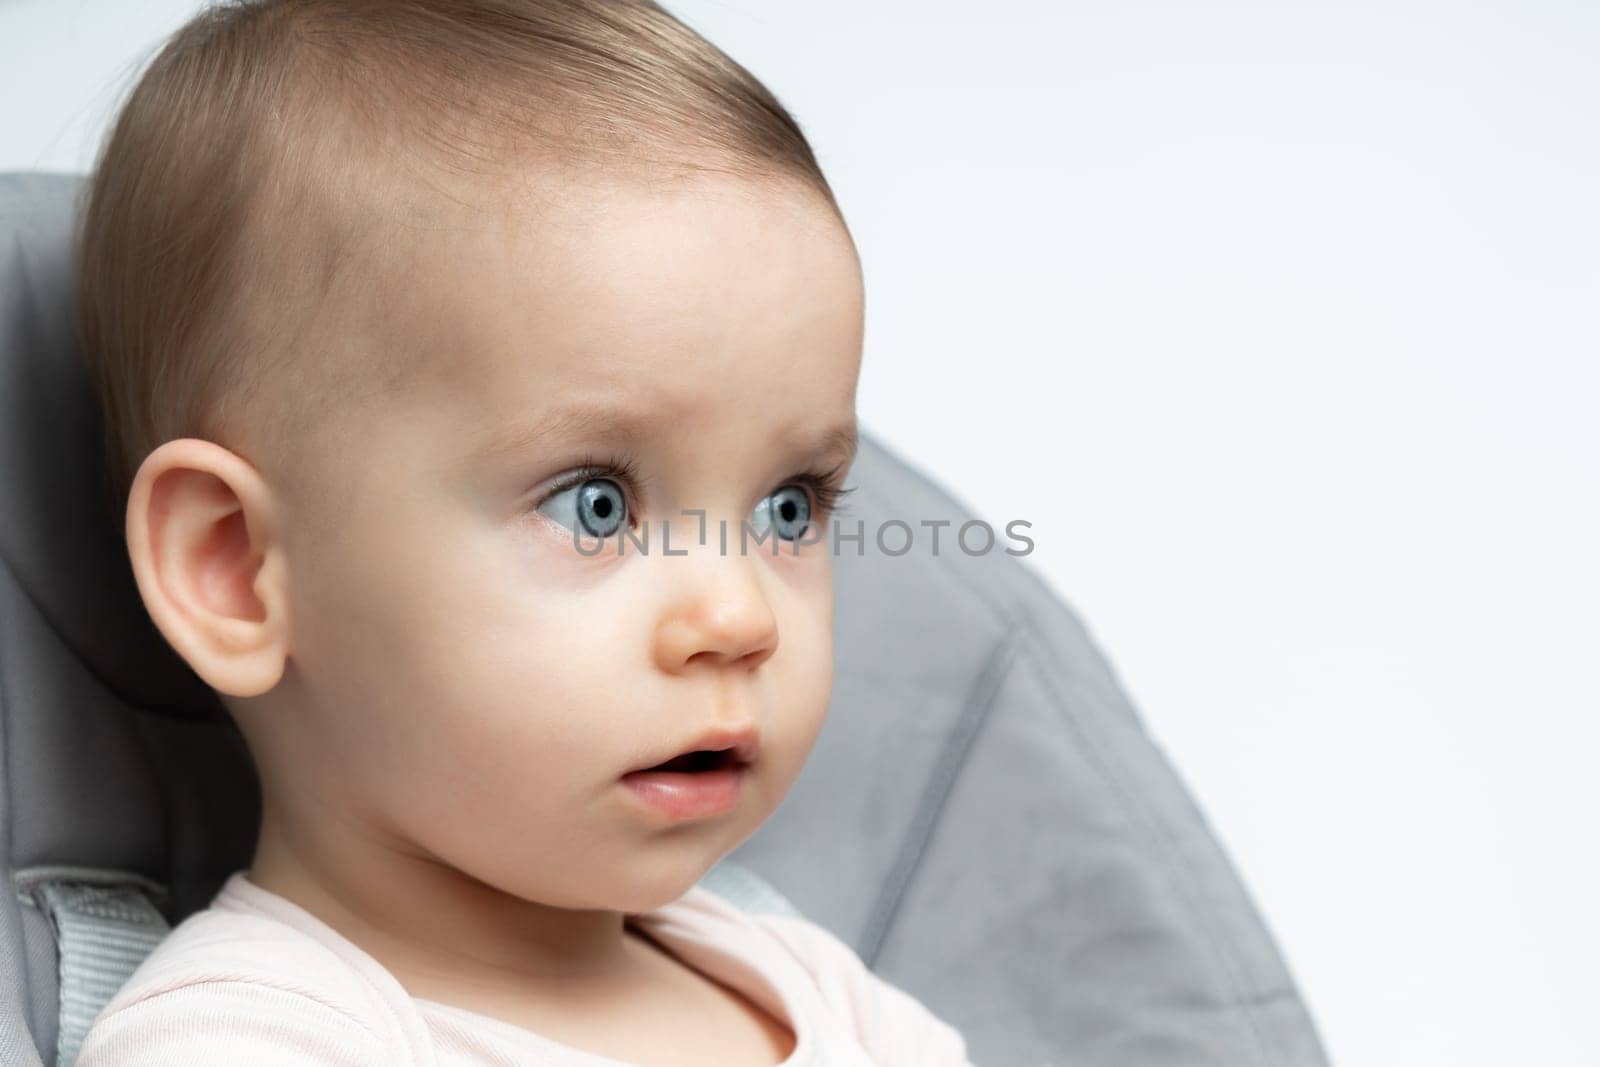 Baby in a highchair, with a thoughtful and innocent gaze. Ideal for illustrating articles on early childhood development, this image conveys the depth of a young child's contemplation and the purity of early life experiences.